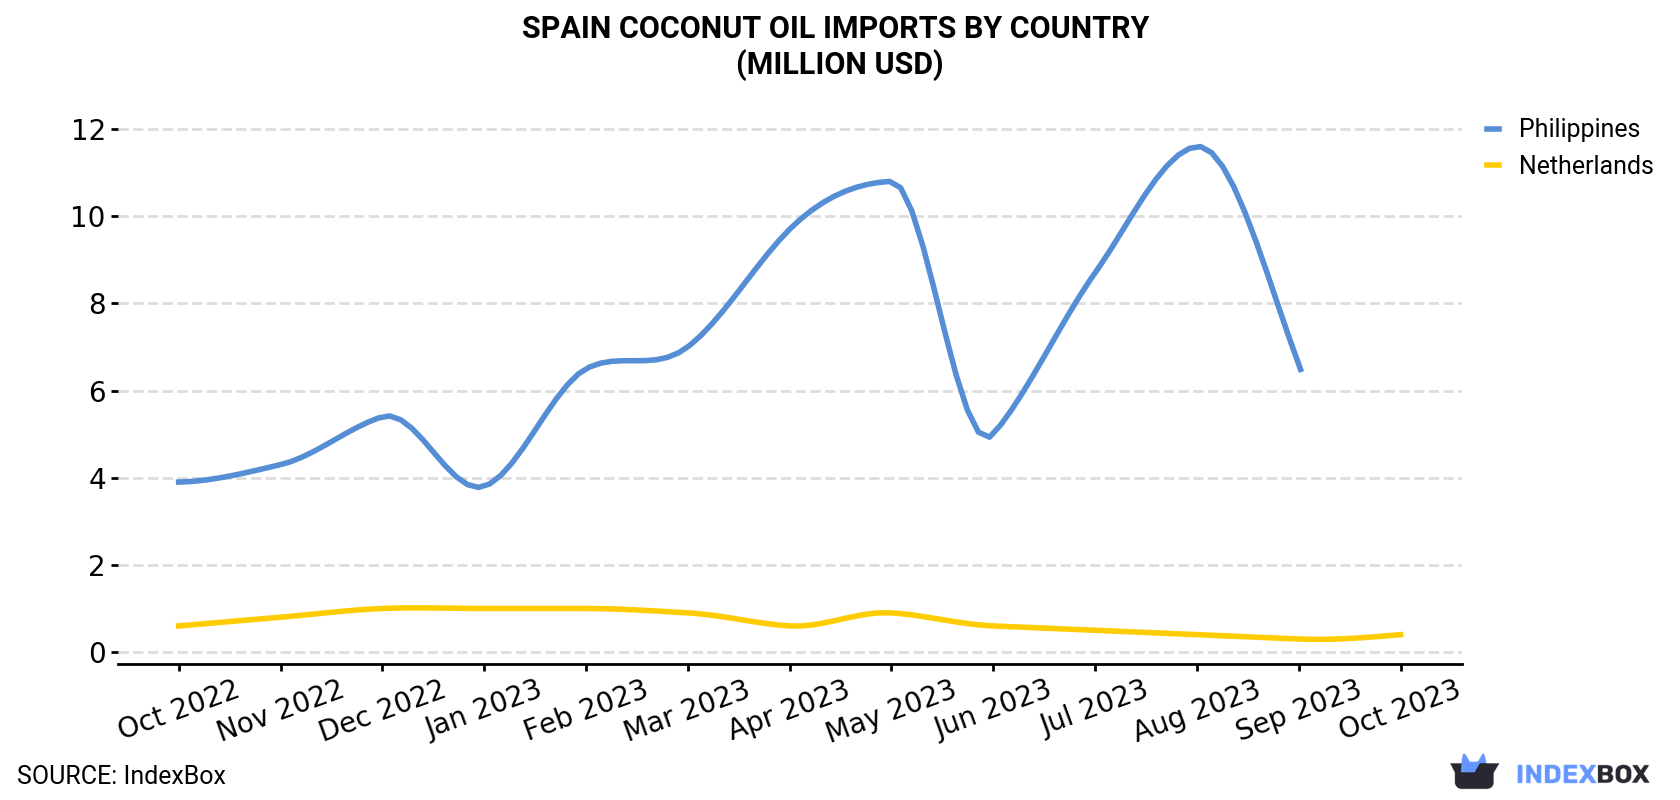 Spain Coconut Oil Imports By Country (Million USD)